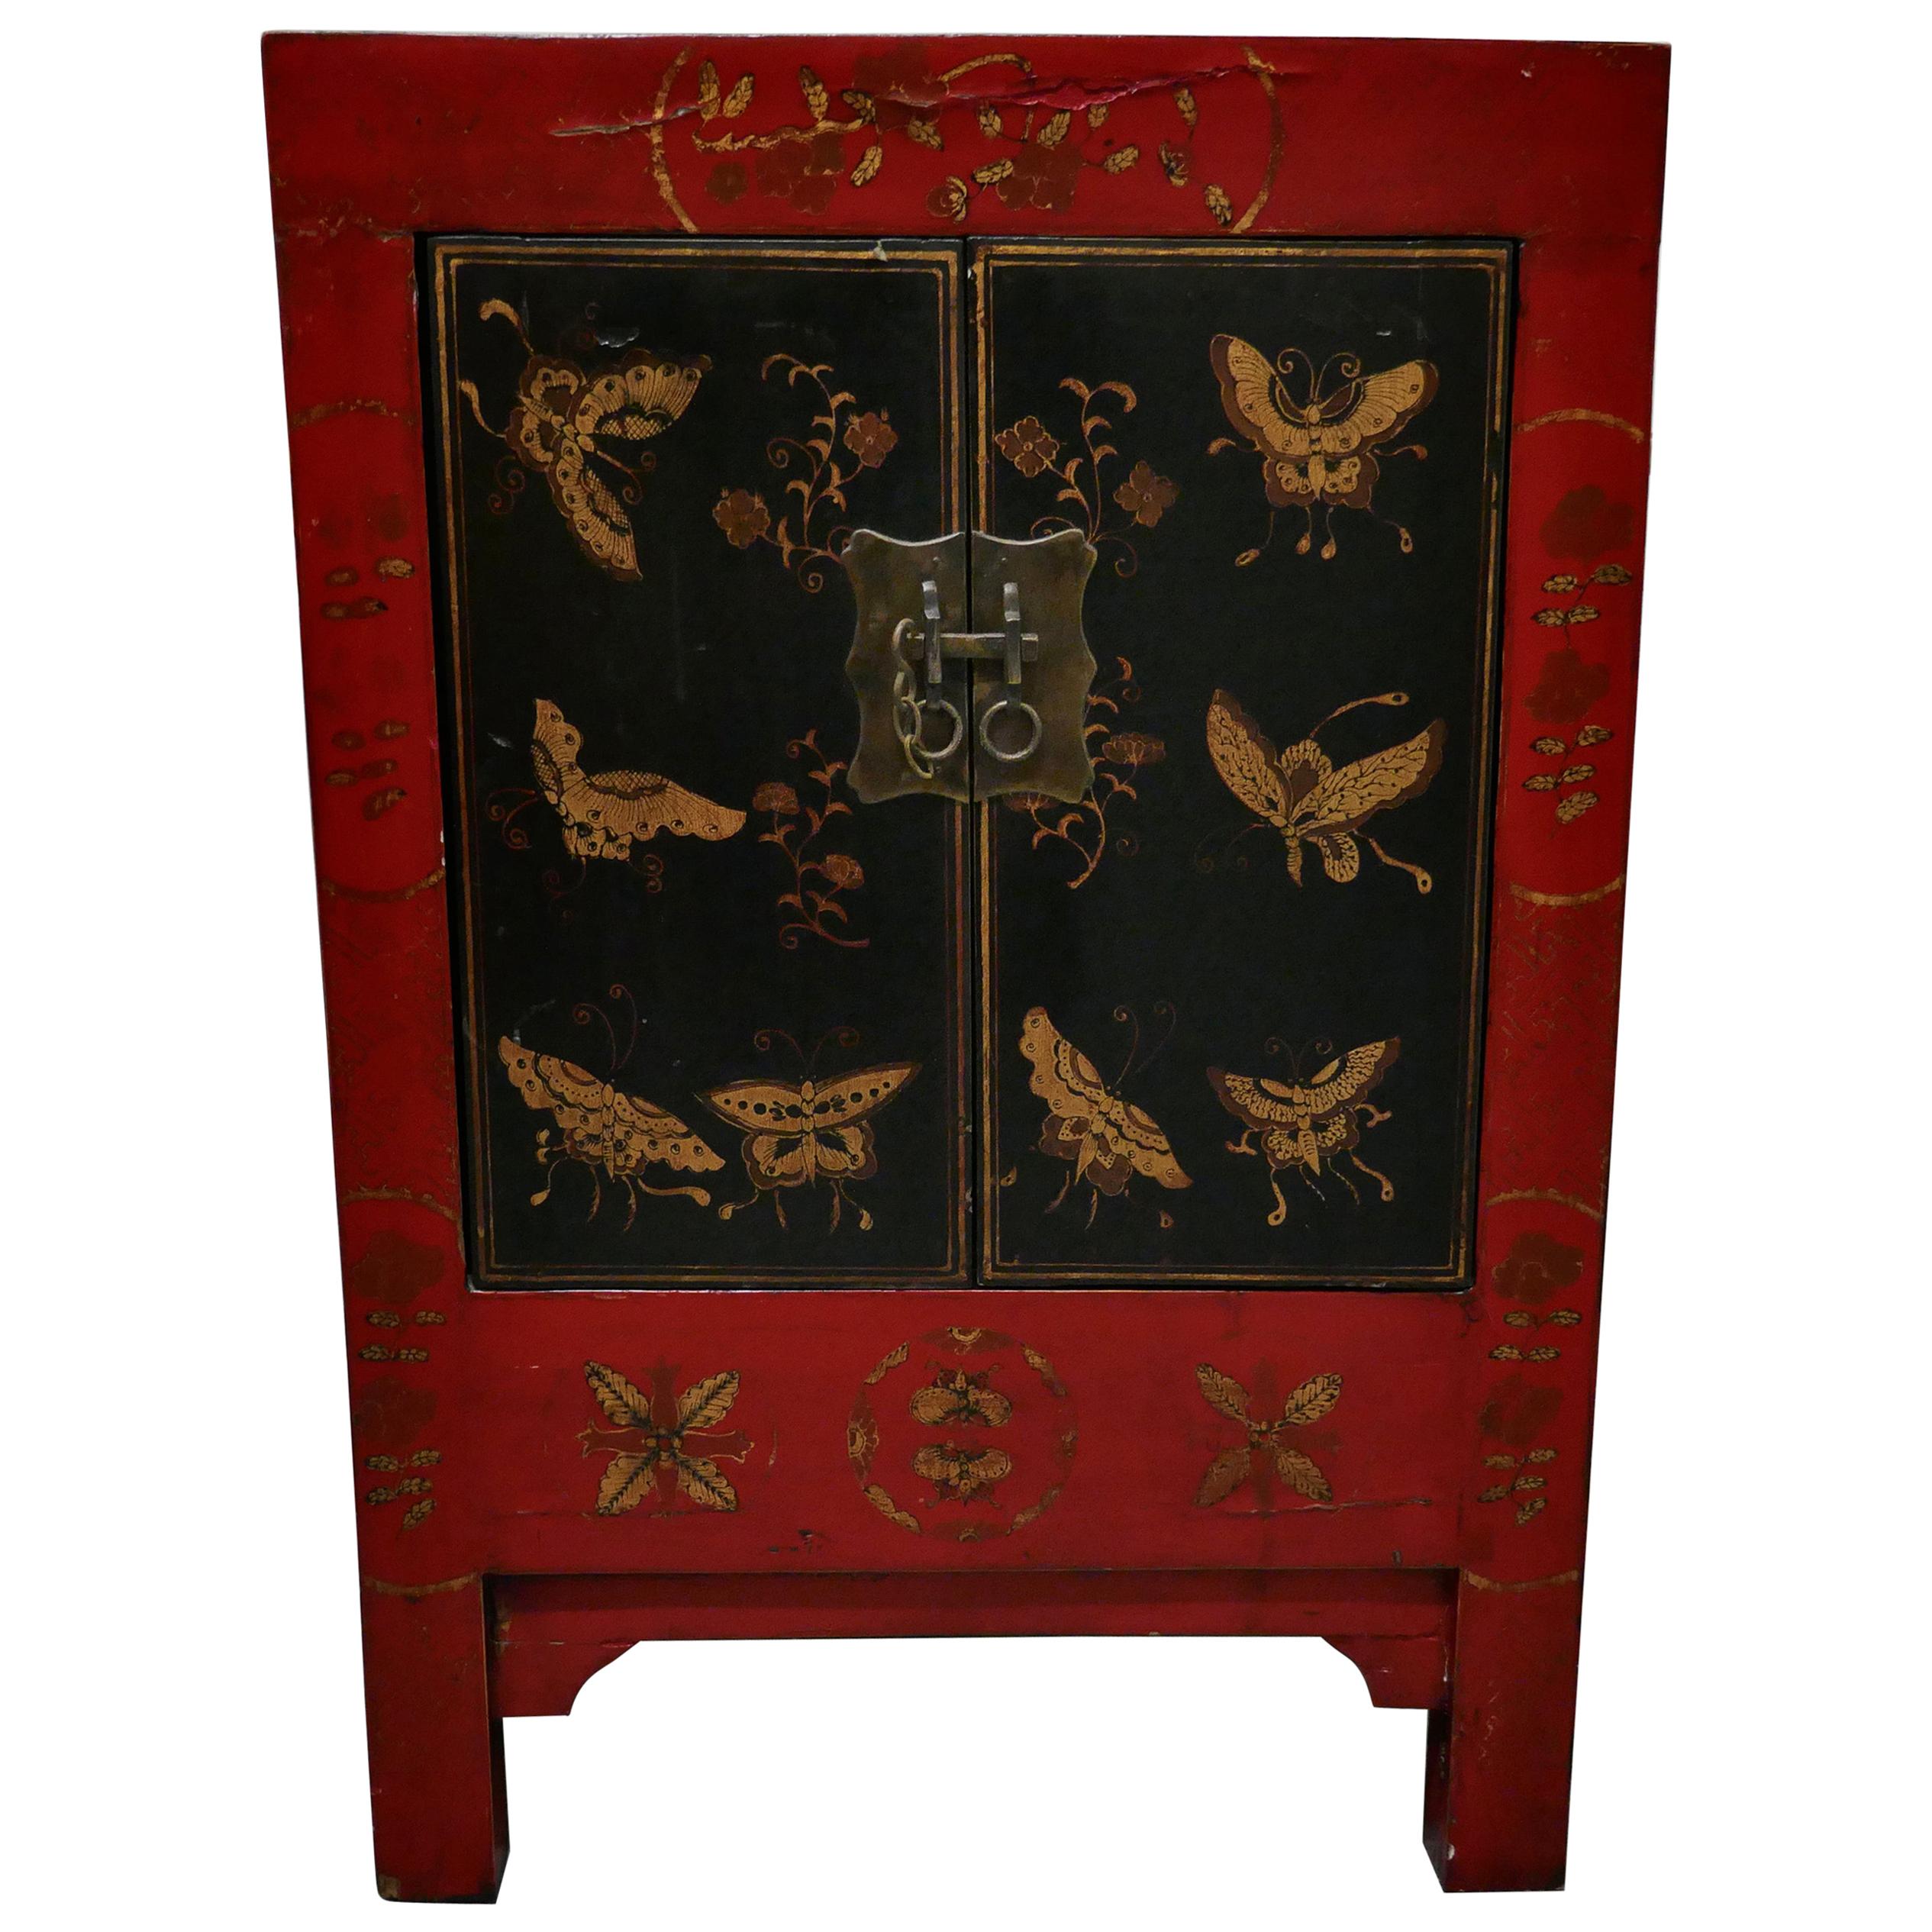 Red and Black Chinoiserie Lacquer Cupboard Decorated with Butterflies